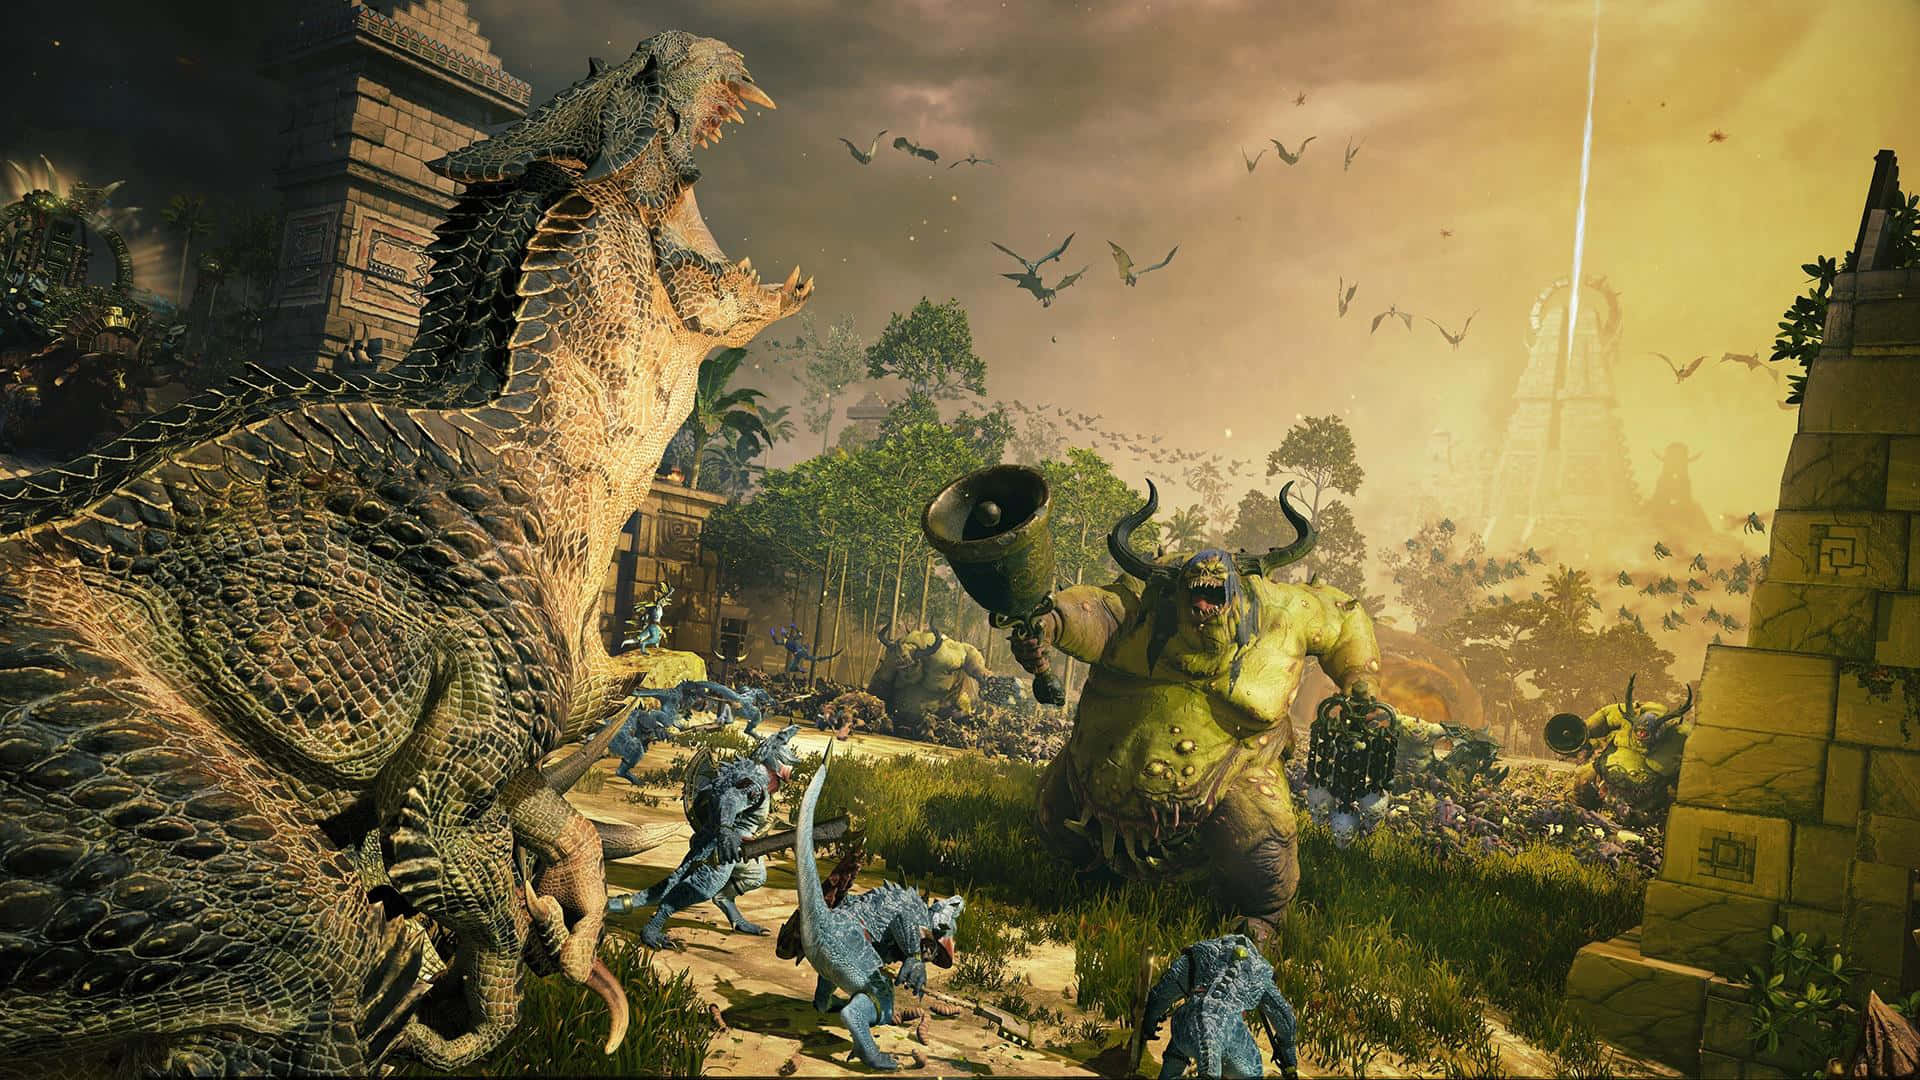 A Screenshot Of A Game With Dinosaurs And Other Creatures